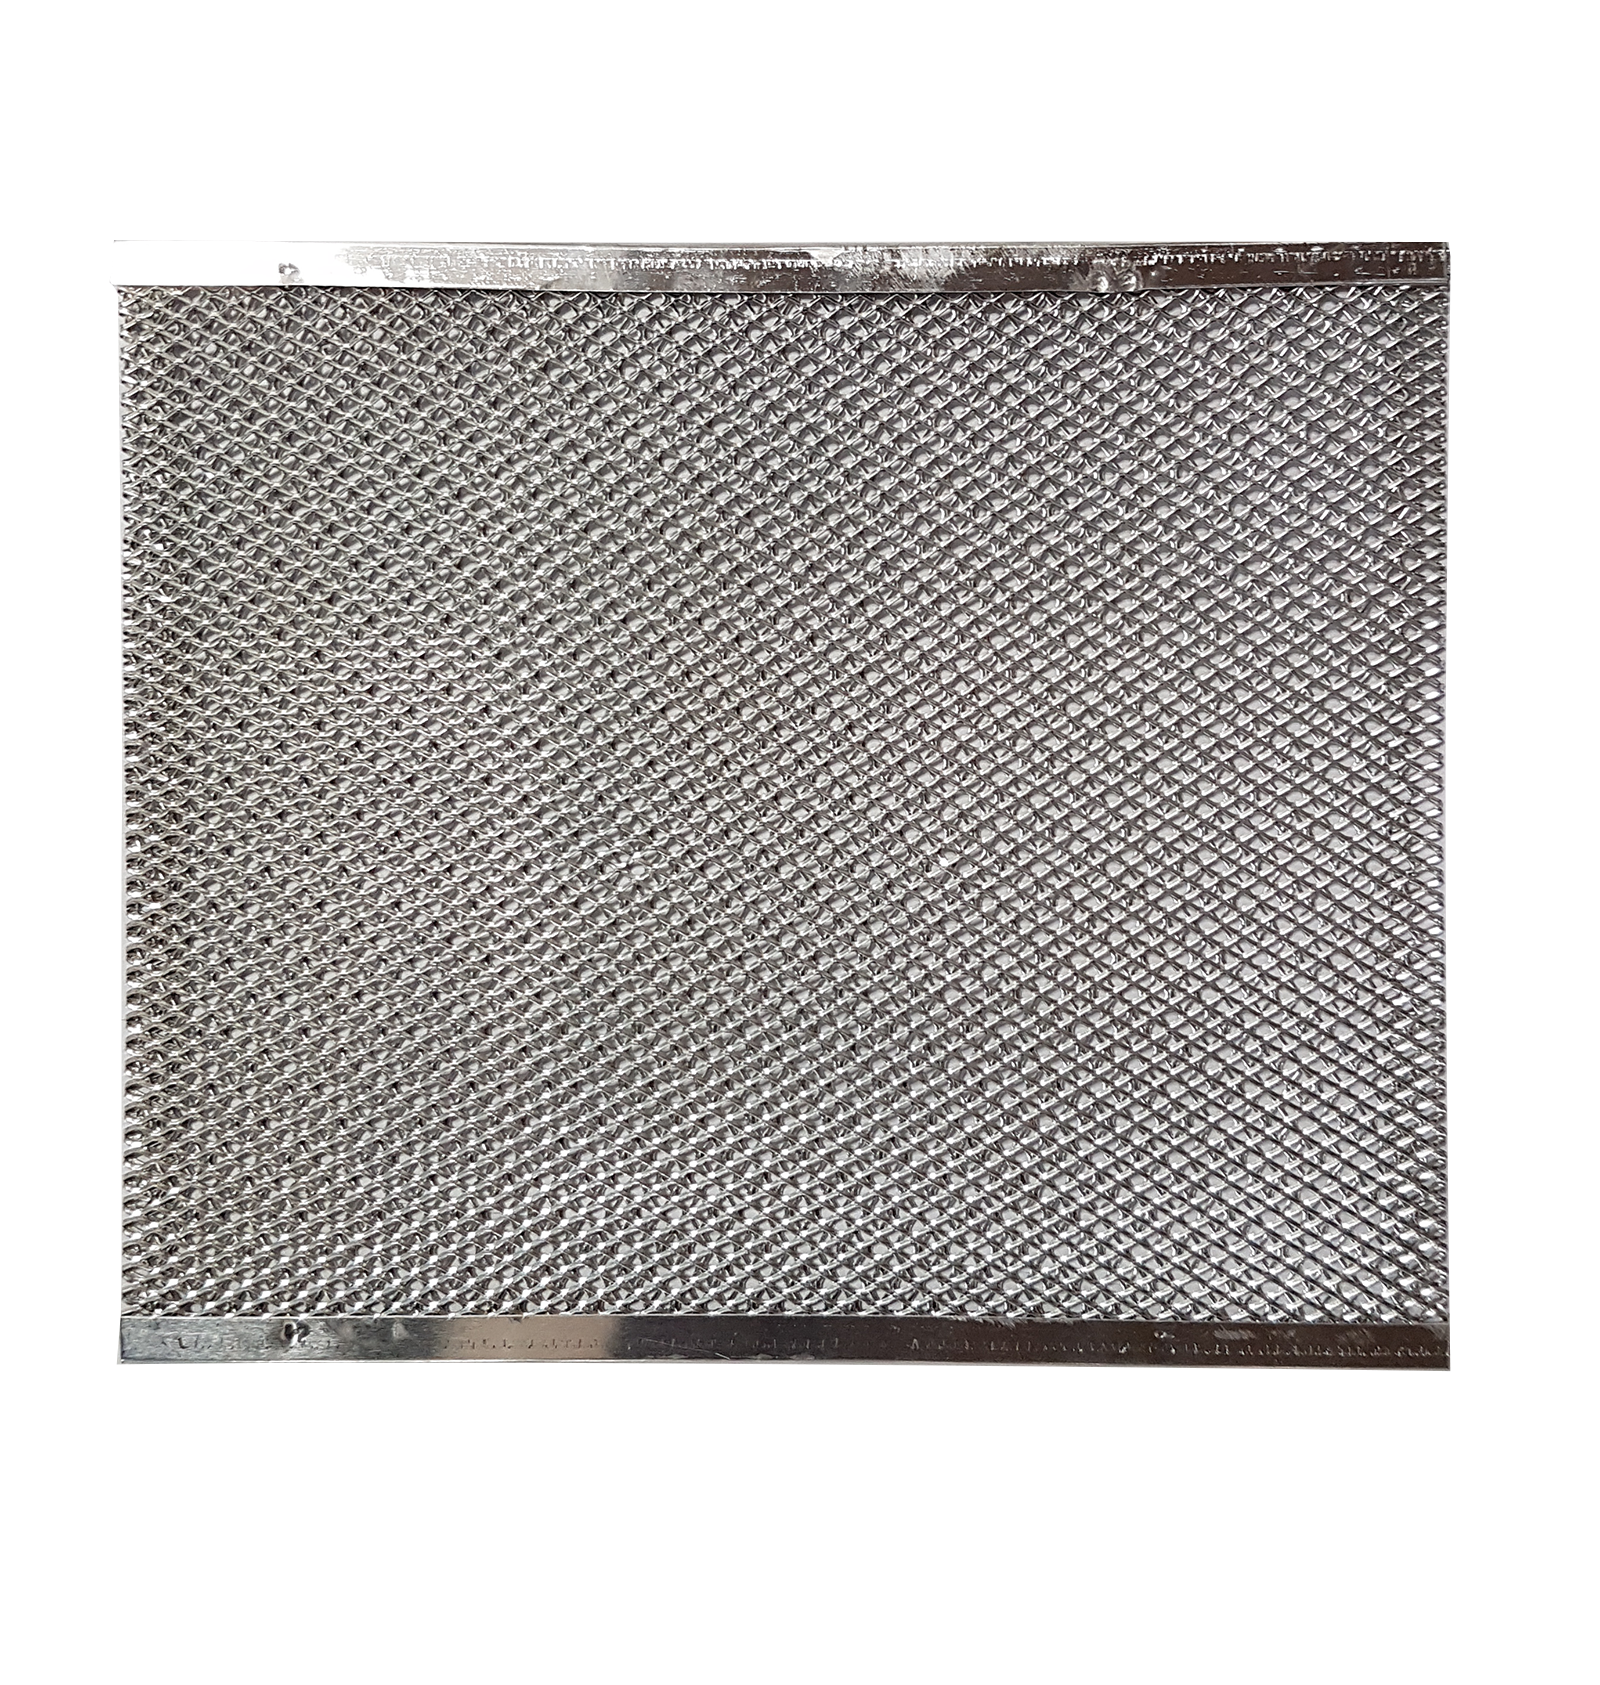 REPLACEMENT METAL GREASE FILTER FOR CUCINA FAN7201